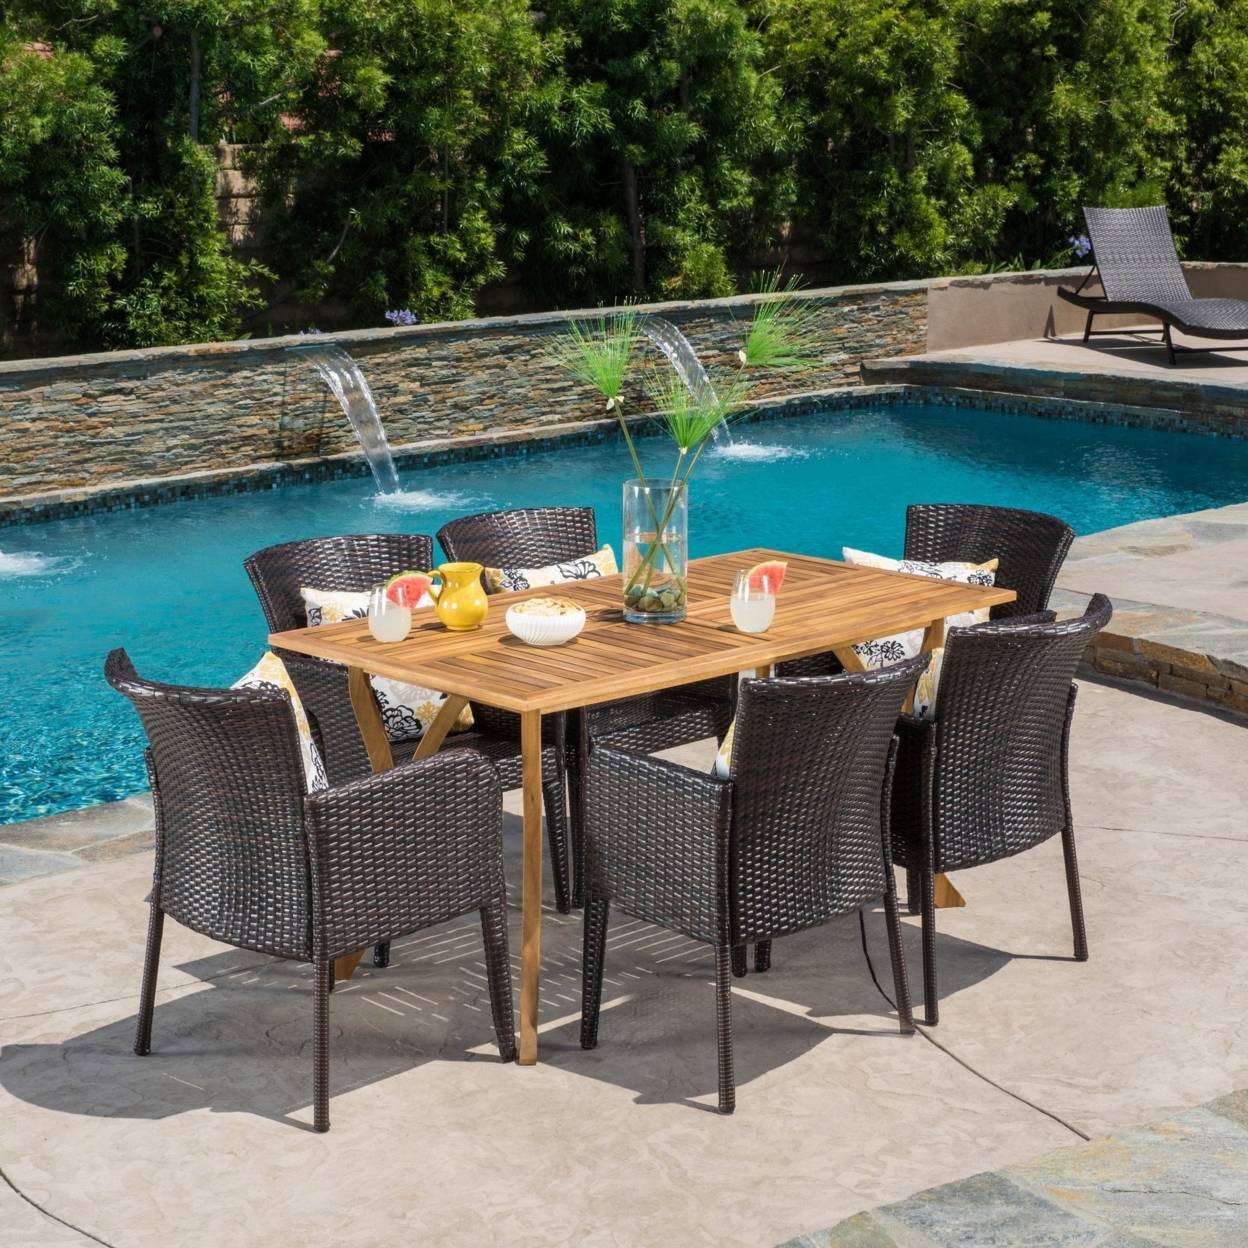 Helton 7 Piece Outdoor Dining Set (Wood Table With Wicker Chairs)